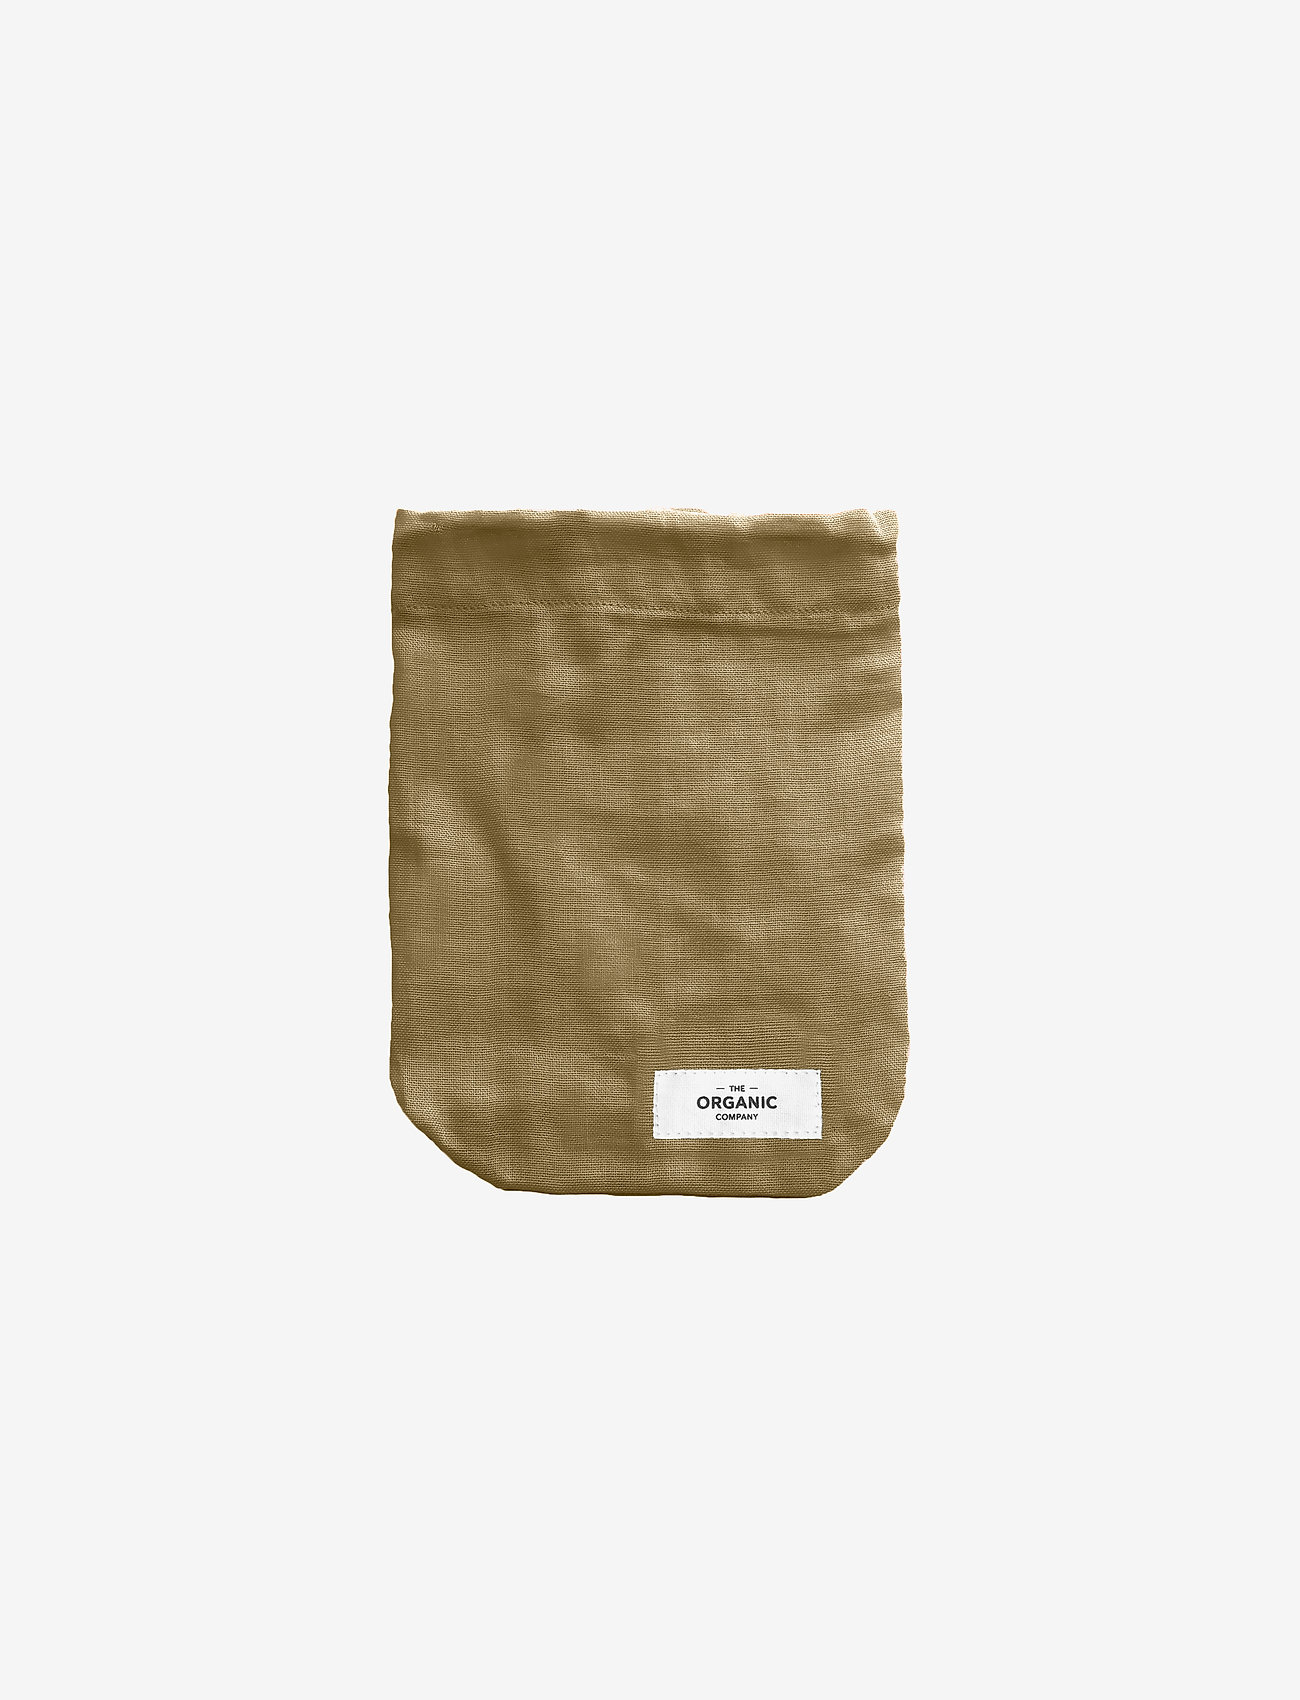 The Organic Company - Food Bag - Small - lowest prices - 215 khaki - 0